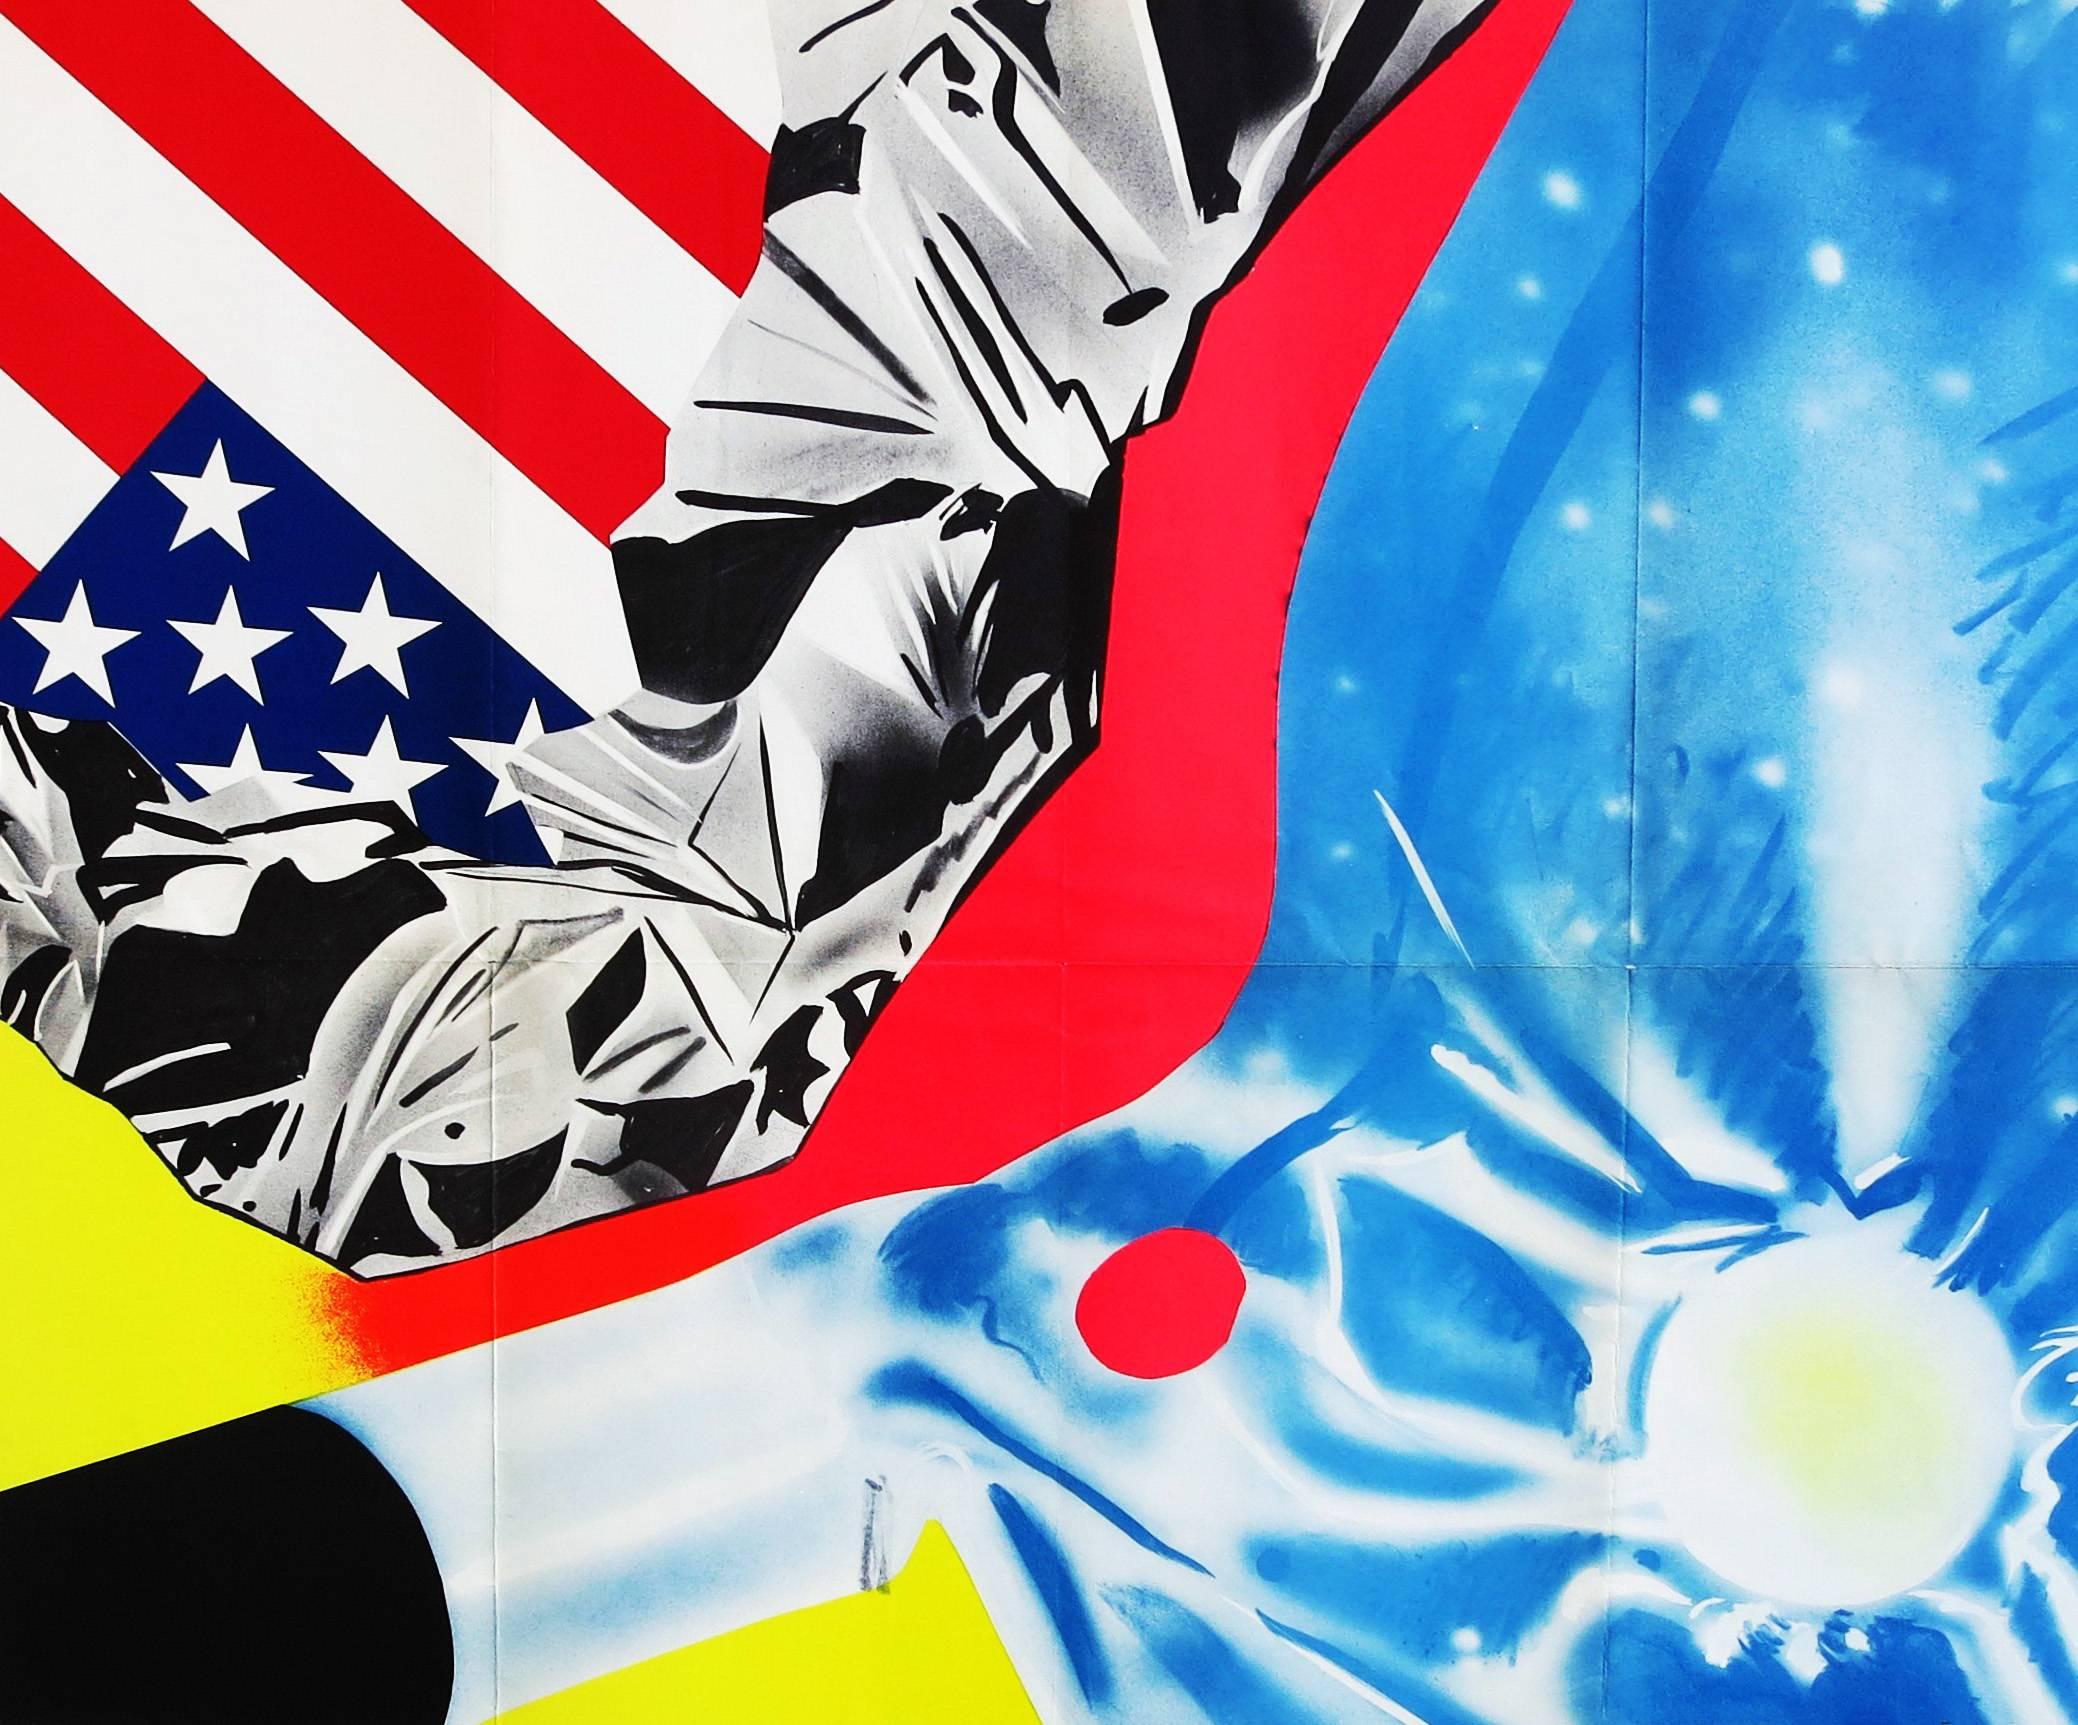 (after) James Rosenquist Abstract Print - James Rosenquist exhibition poster 1970 (vintage James Rosenquist)